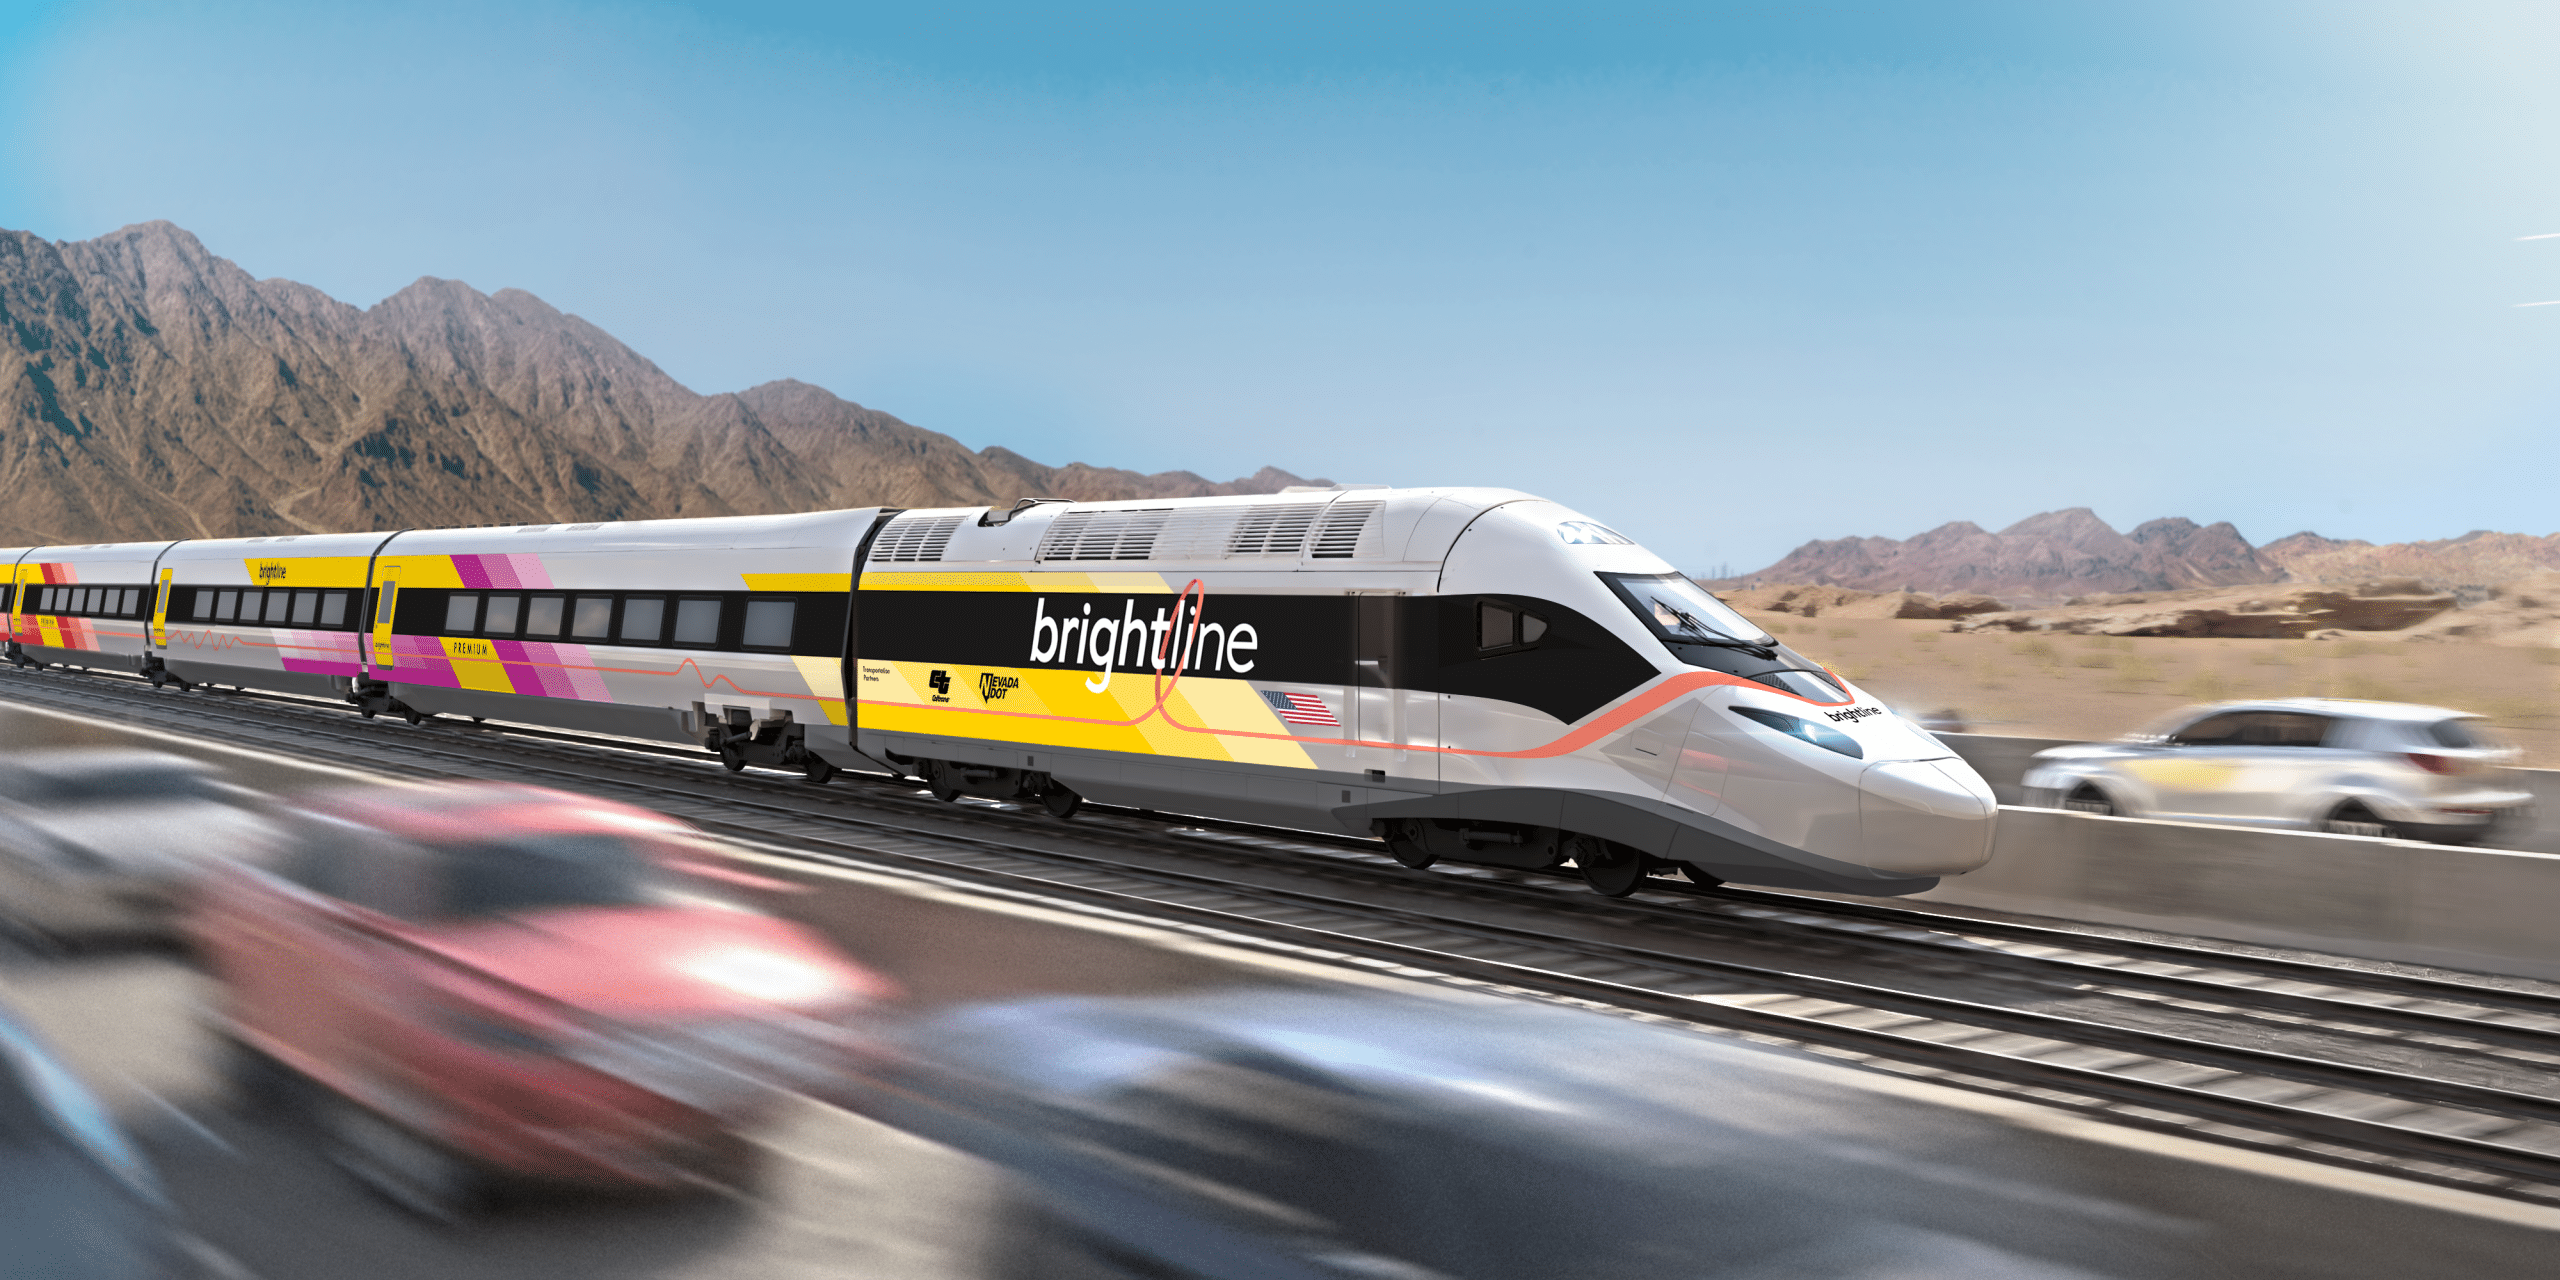 The Las Vegas Bullet Train: Funding, Timeline, and More